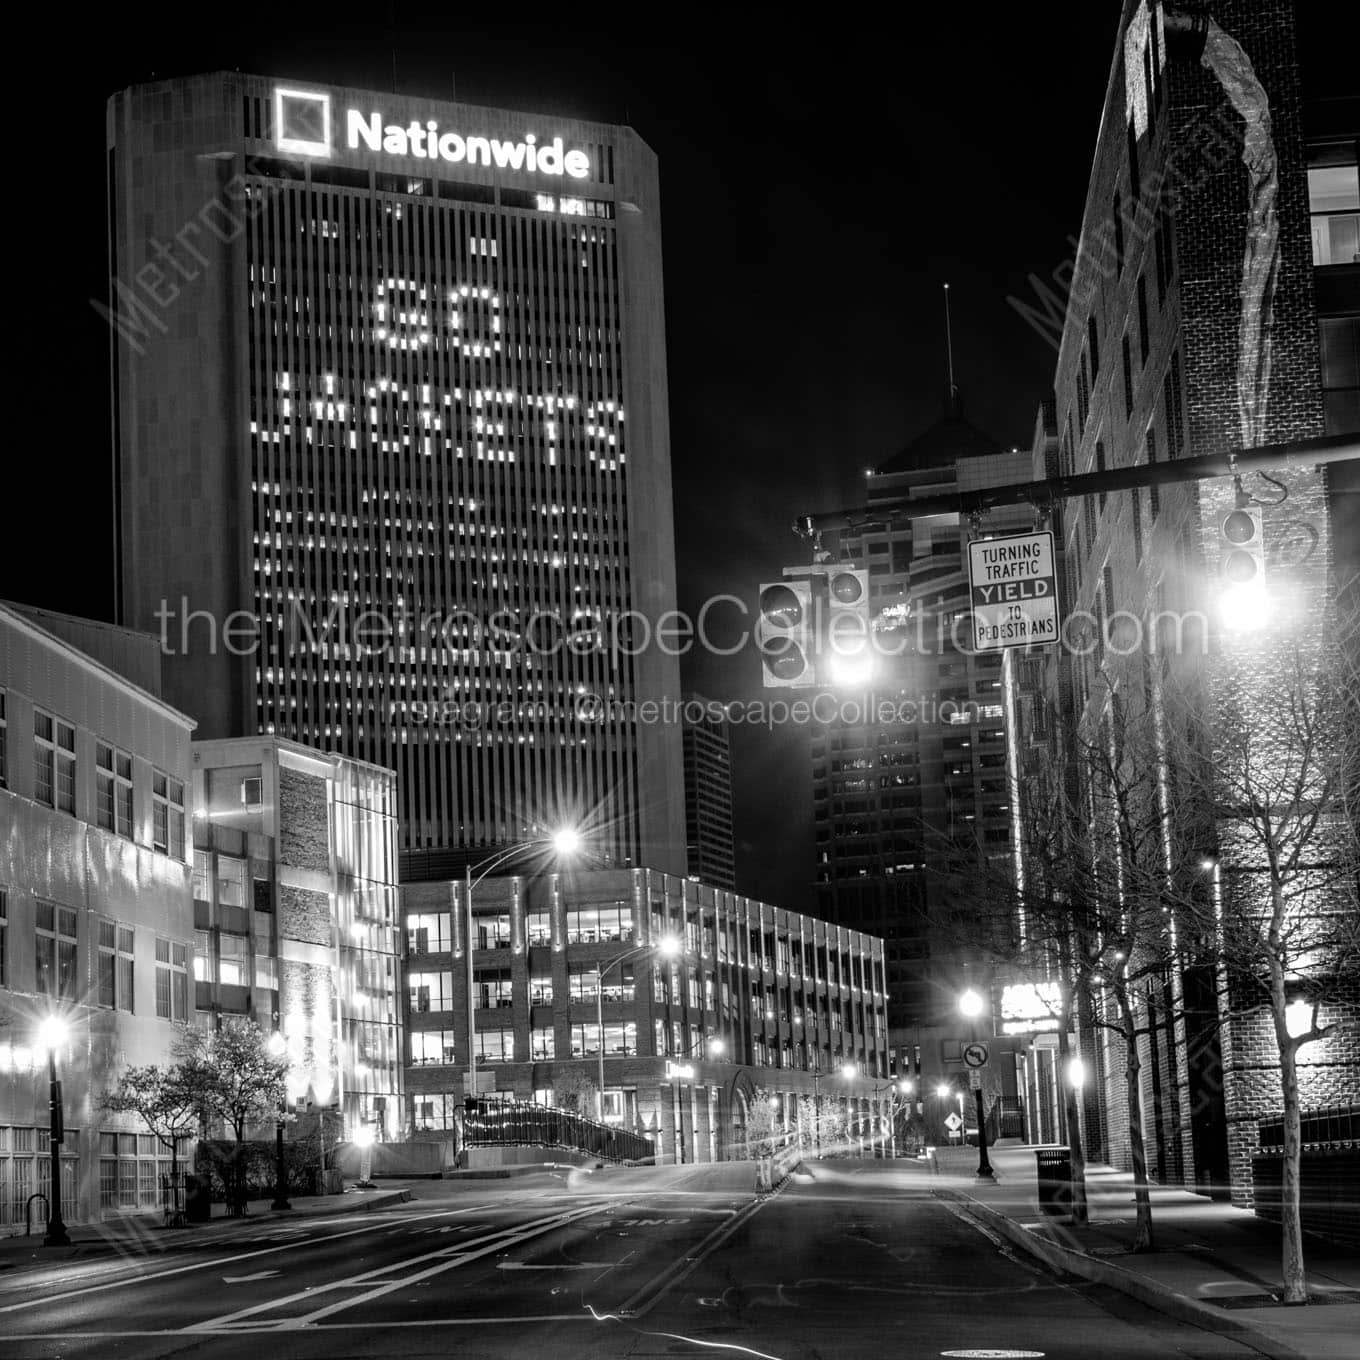 go jackets in nationwide building Black & White Wall Art